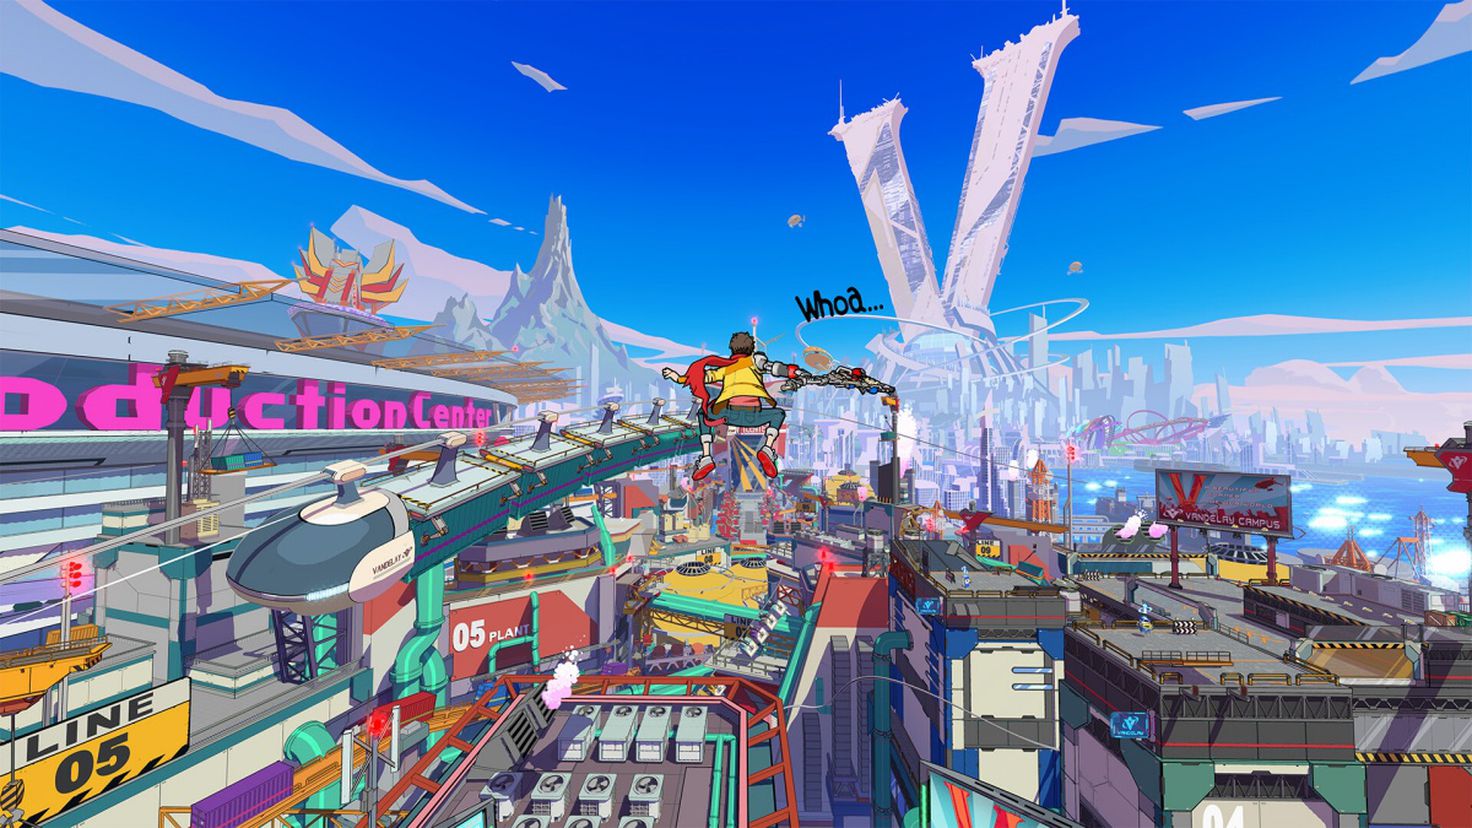 Insomniac: 'Nothing Really Stopping' Sunset Overdrive PlayStation